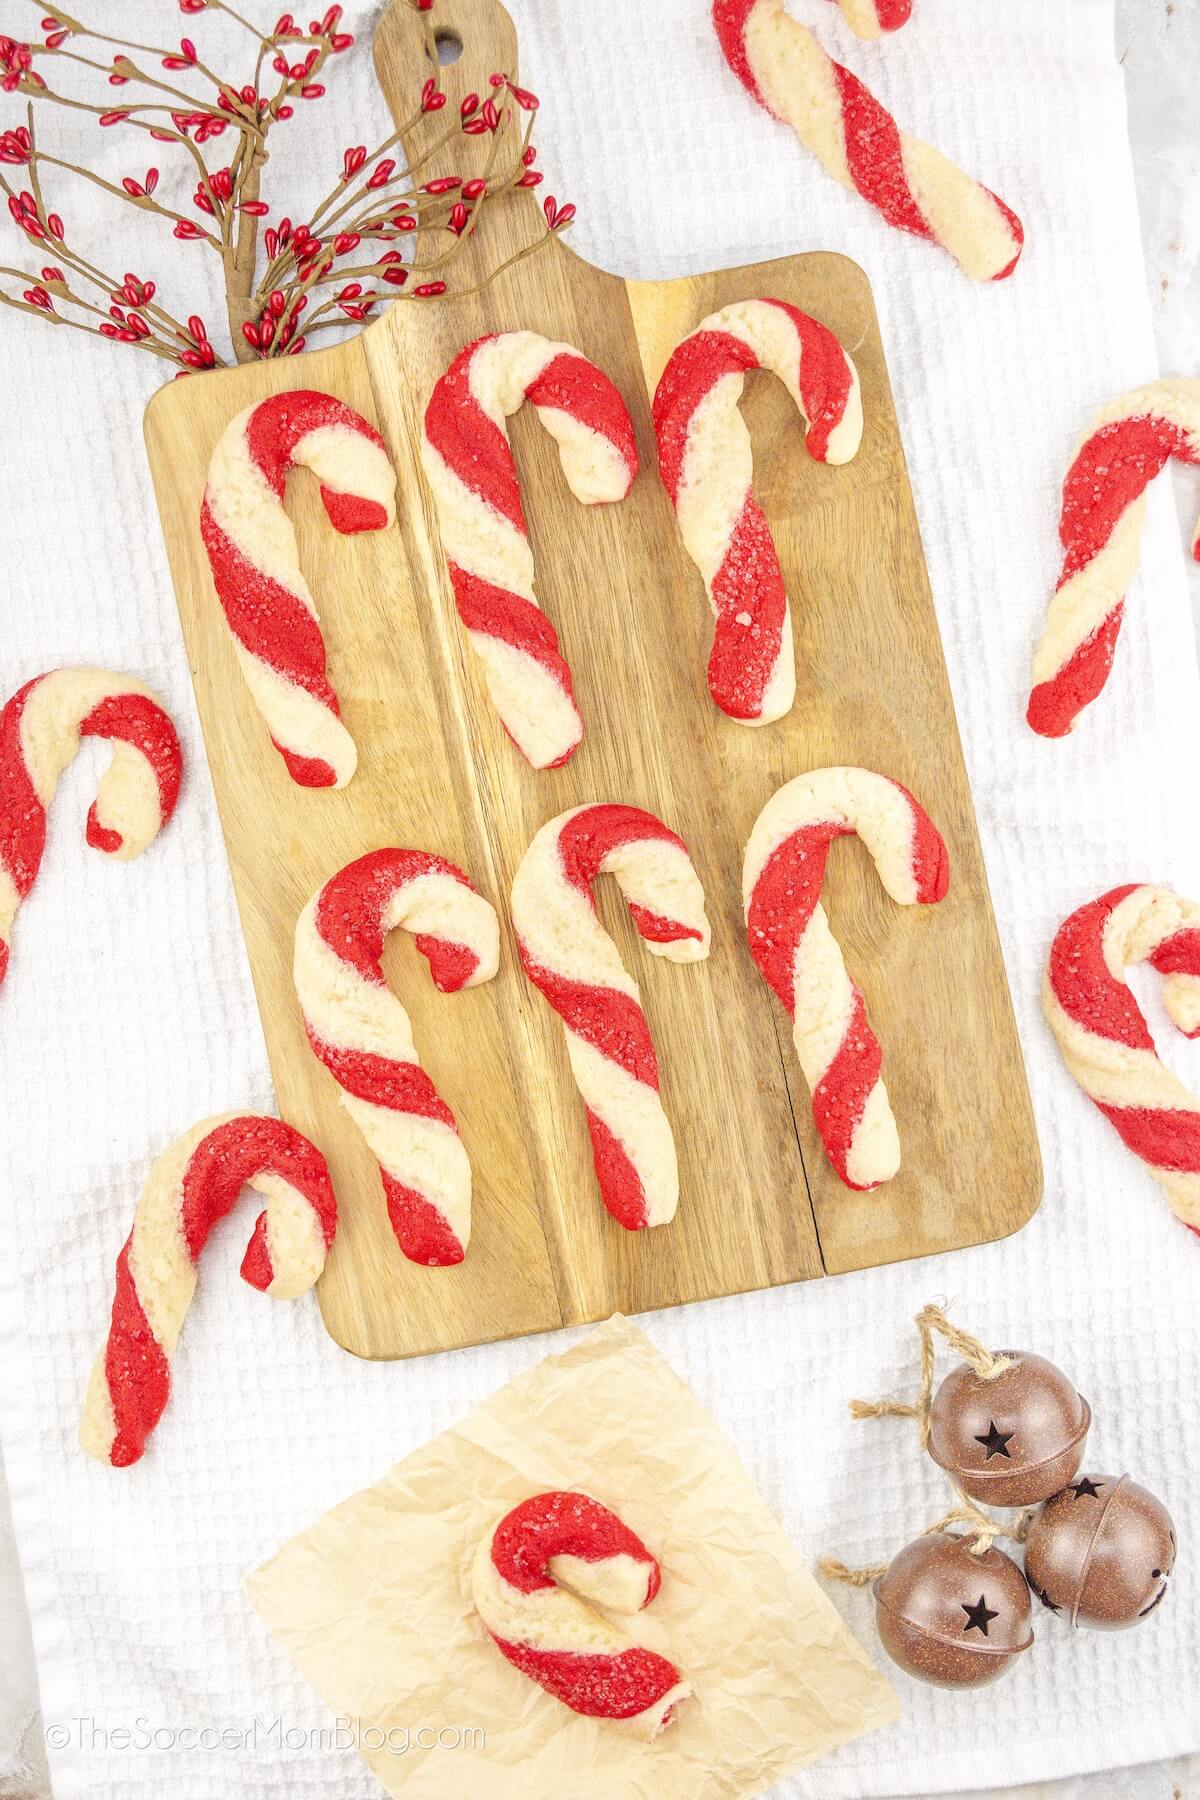 wooden serving board with candy-cane shaped sugar cookies.